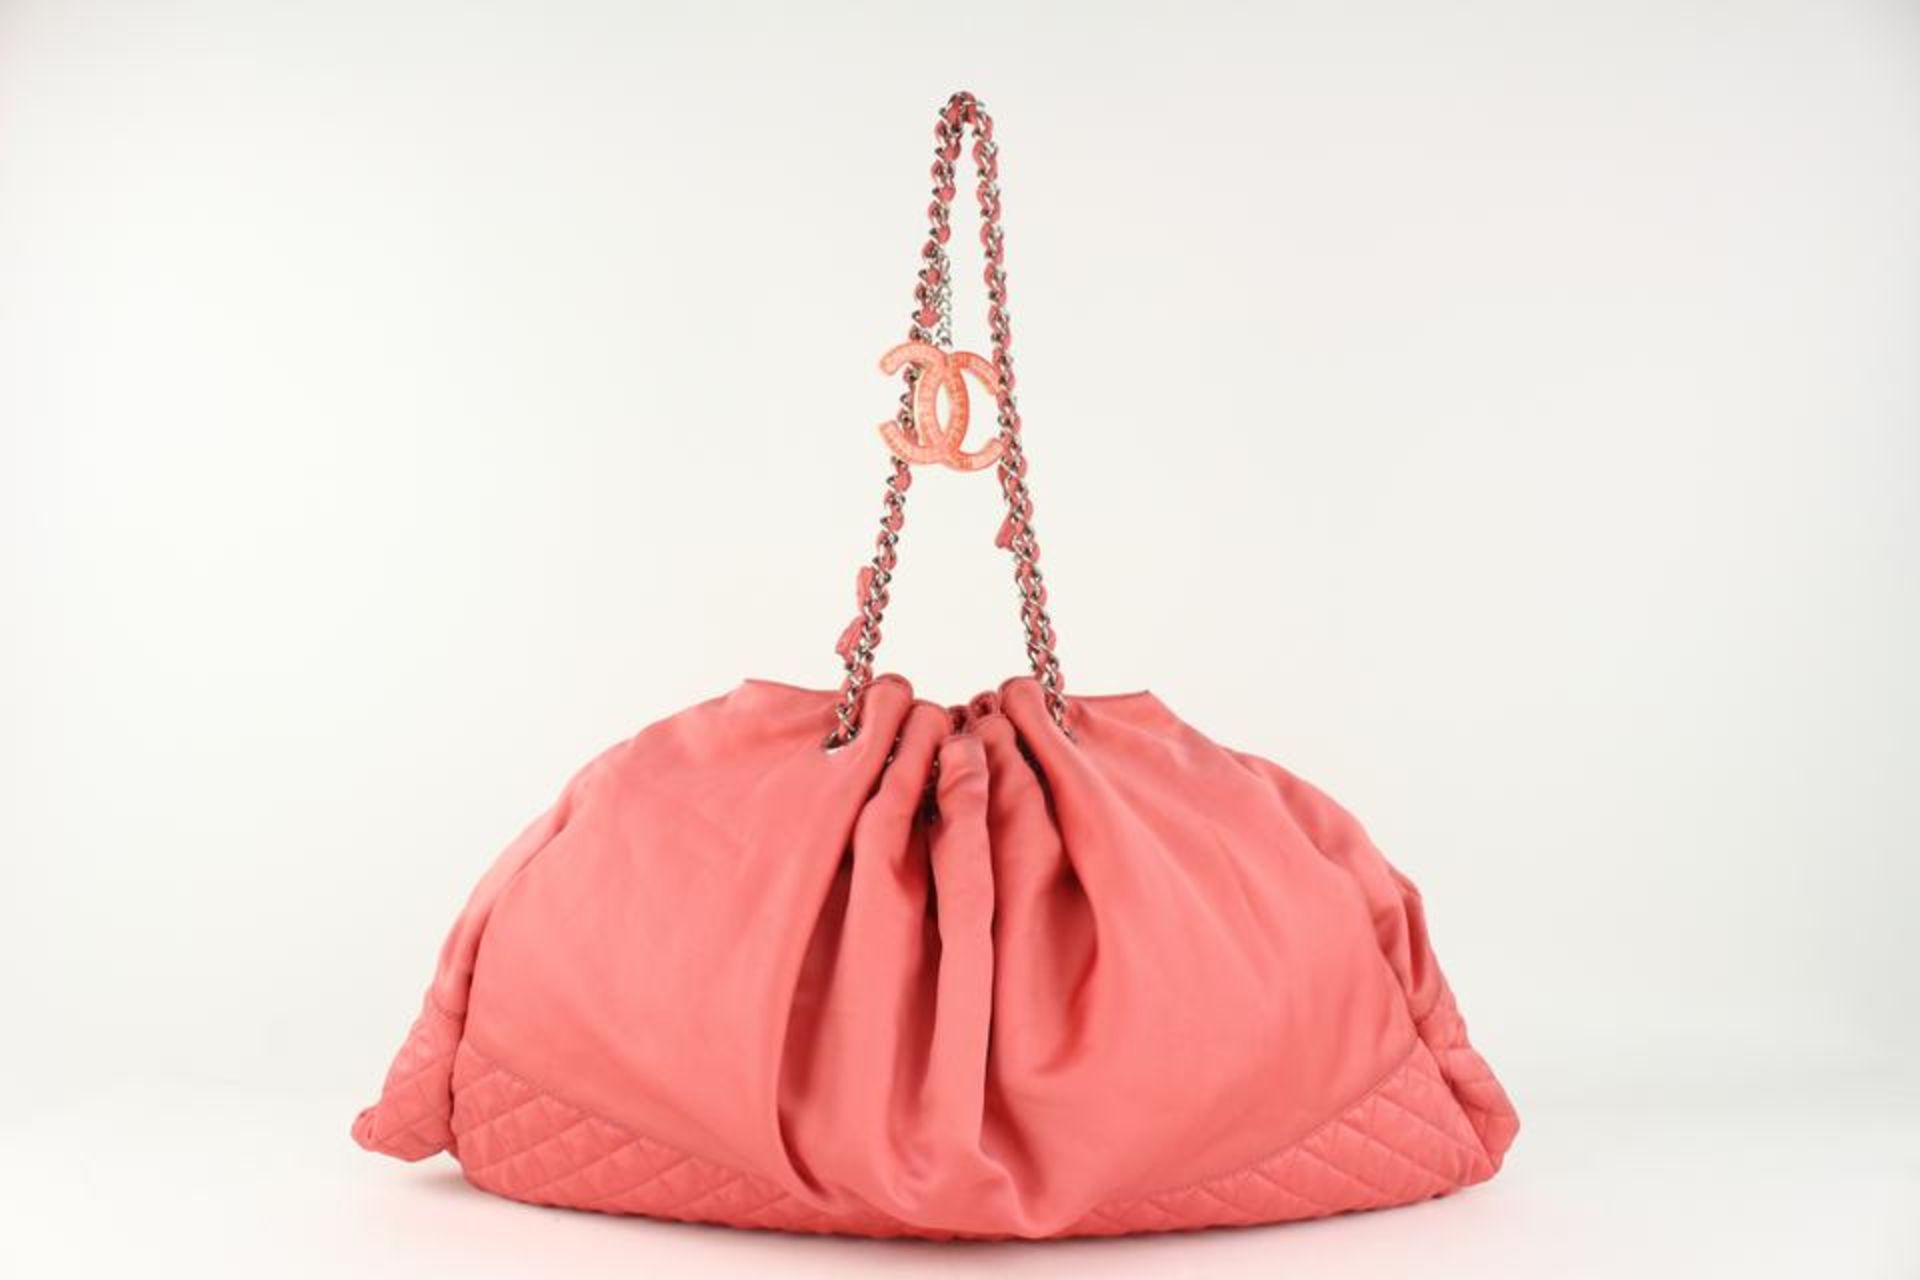 CHANEL XL PINK QUILTED SATIN HOBO CHAIN BAG